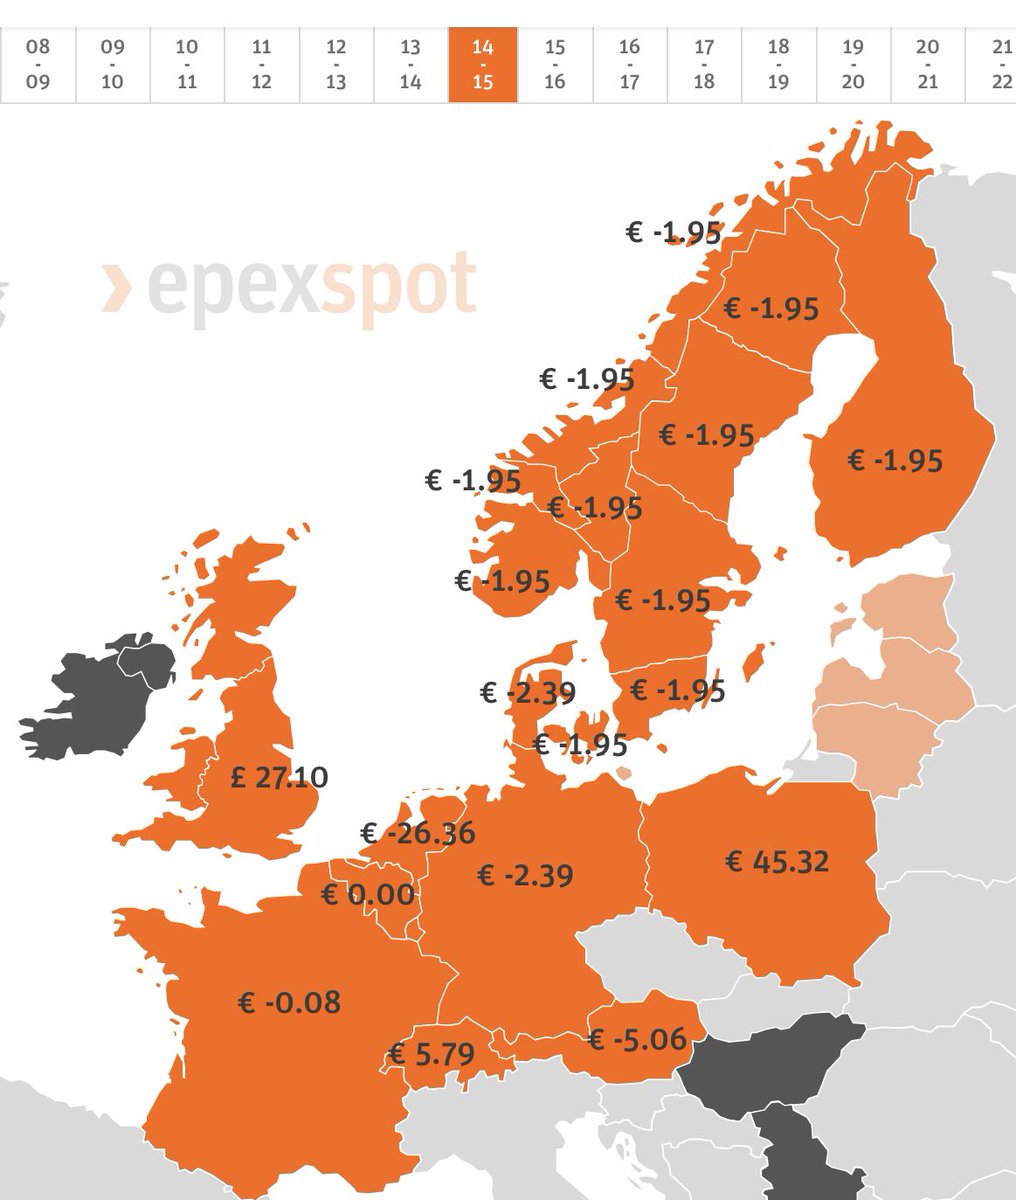 Another weekend, another weekend of negative wholesale #power prices this time across most of #Europe. Basically from 11.00-17.00 today most countries from #France to #Finland will have power prices of zero or below.